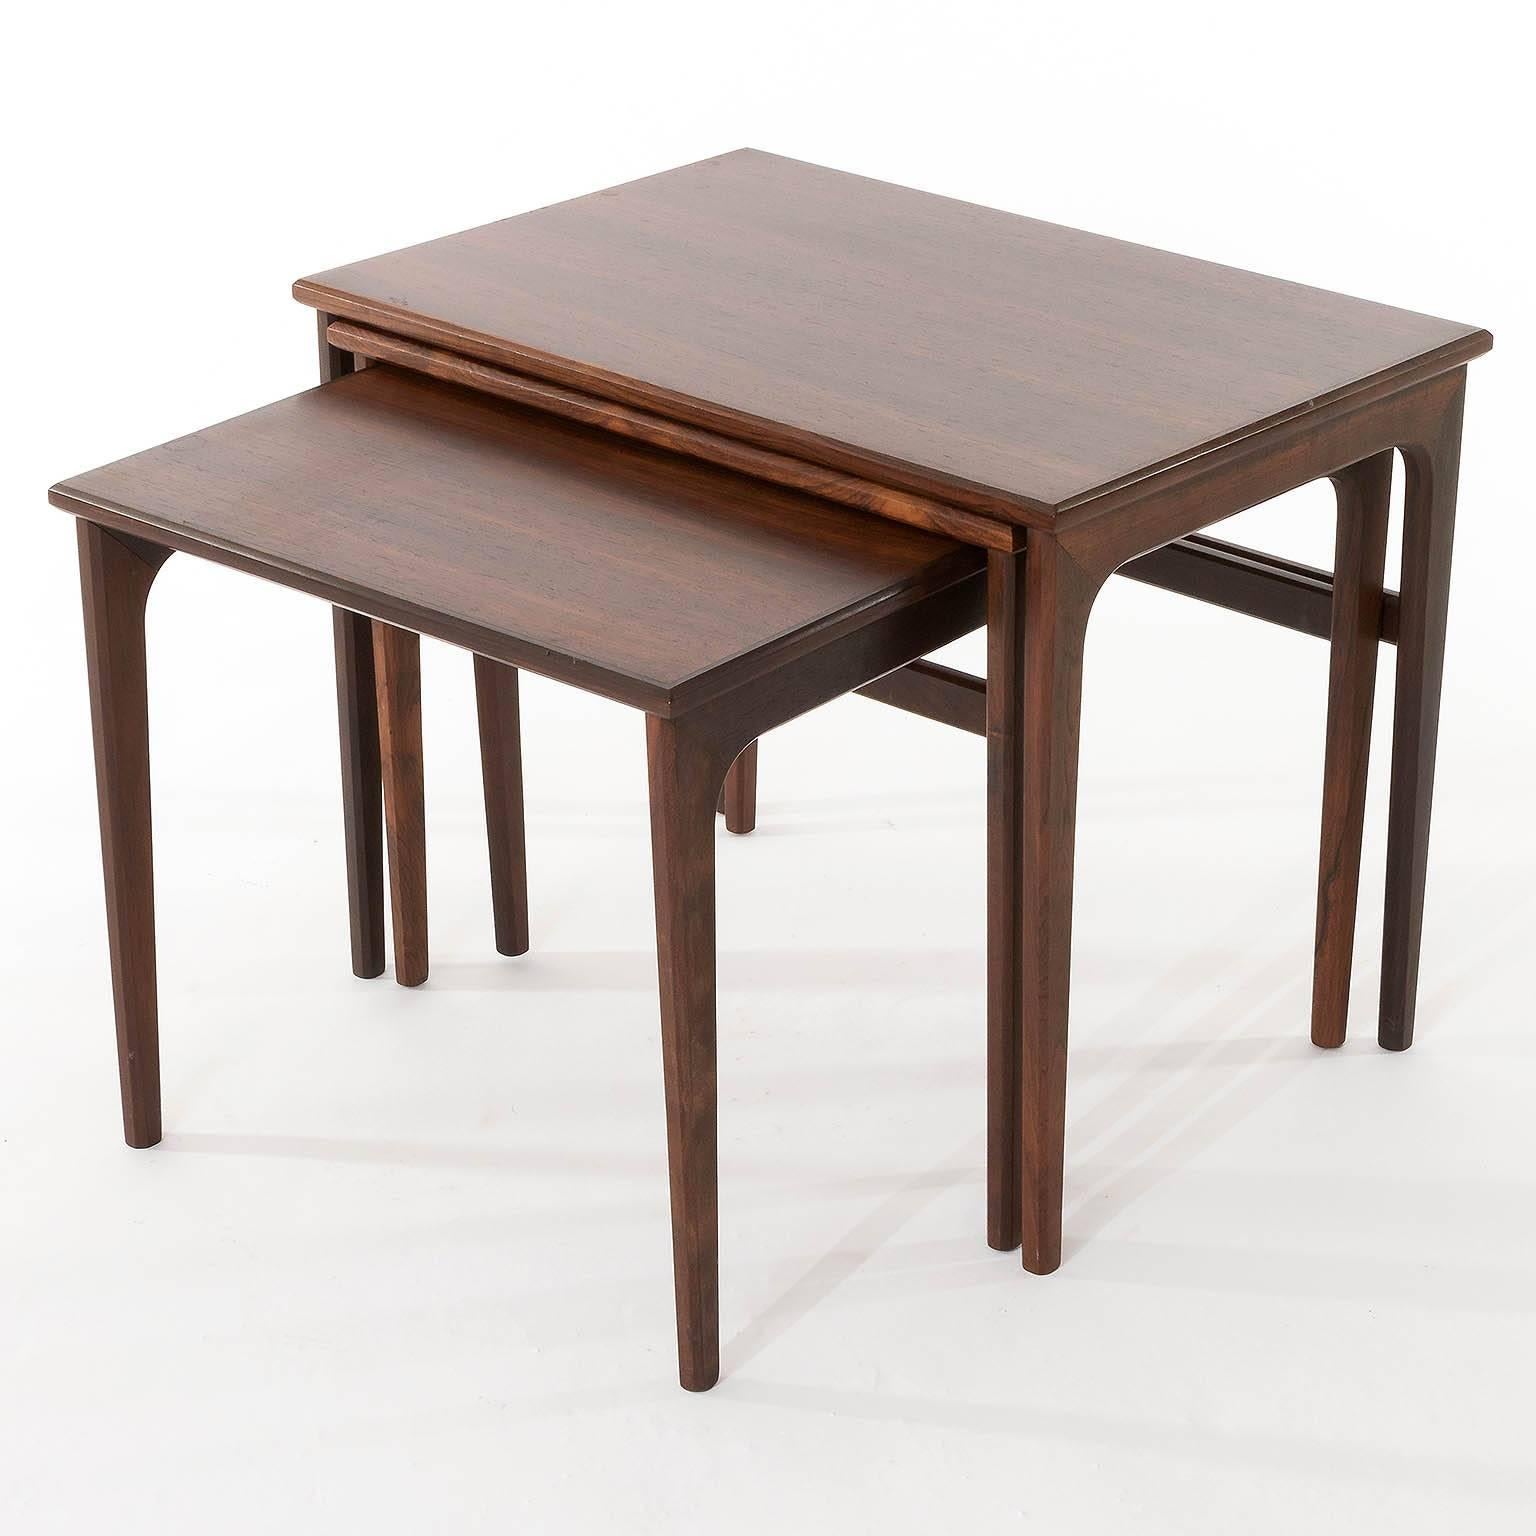 A set of three Danish / Scandinavian Modern nesting tables made of rosewood or palisander, manufactured in Mid-Century, circa 1960.
Please note: furtniture made of rosewood can not be shipped to the US.
   